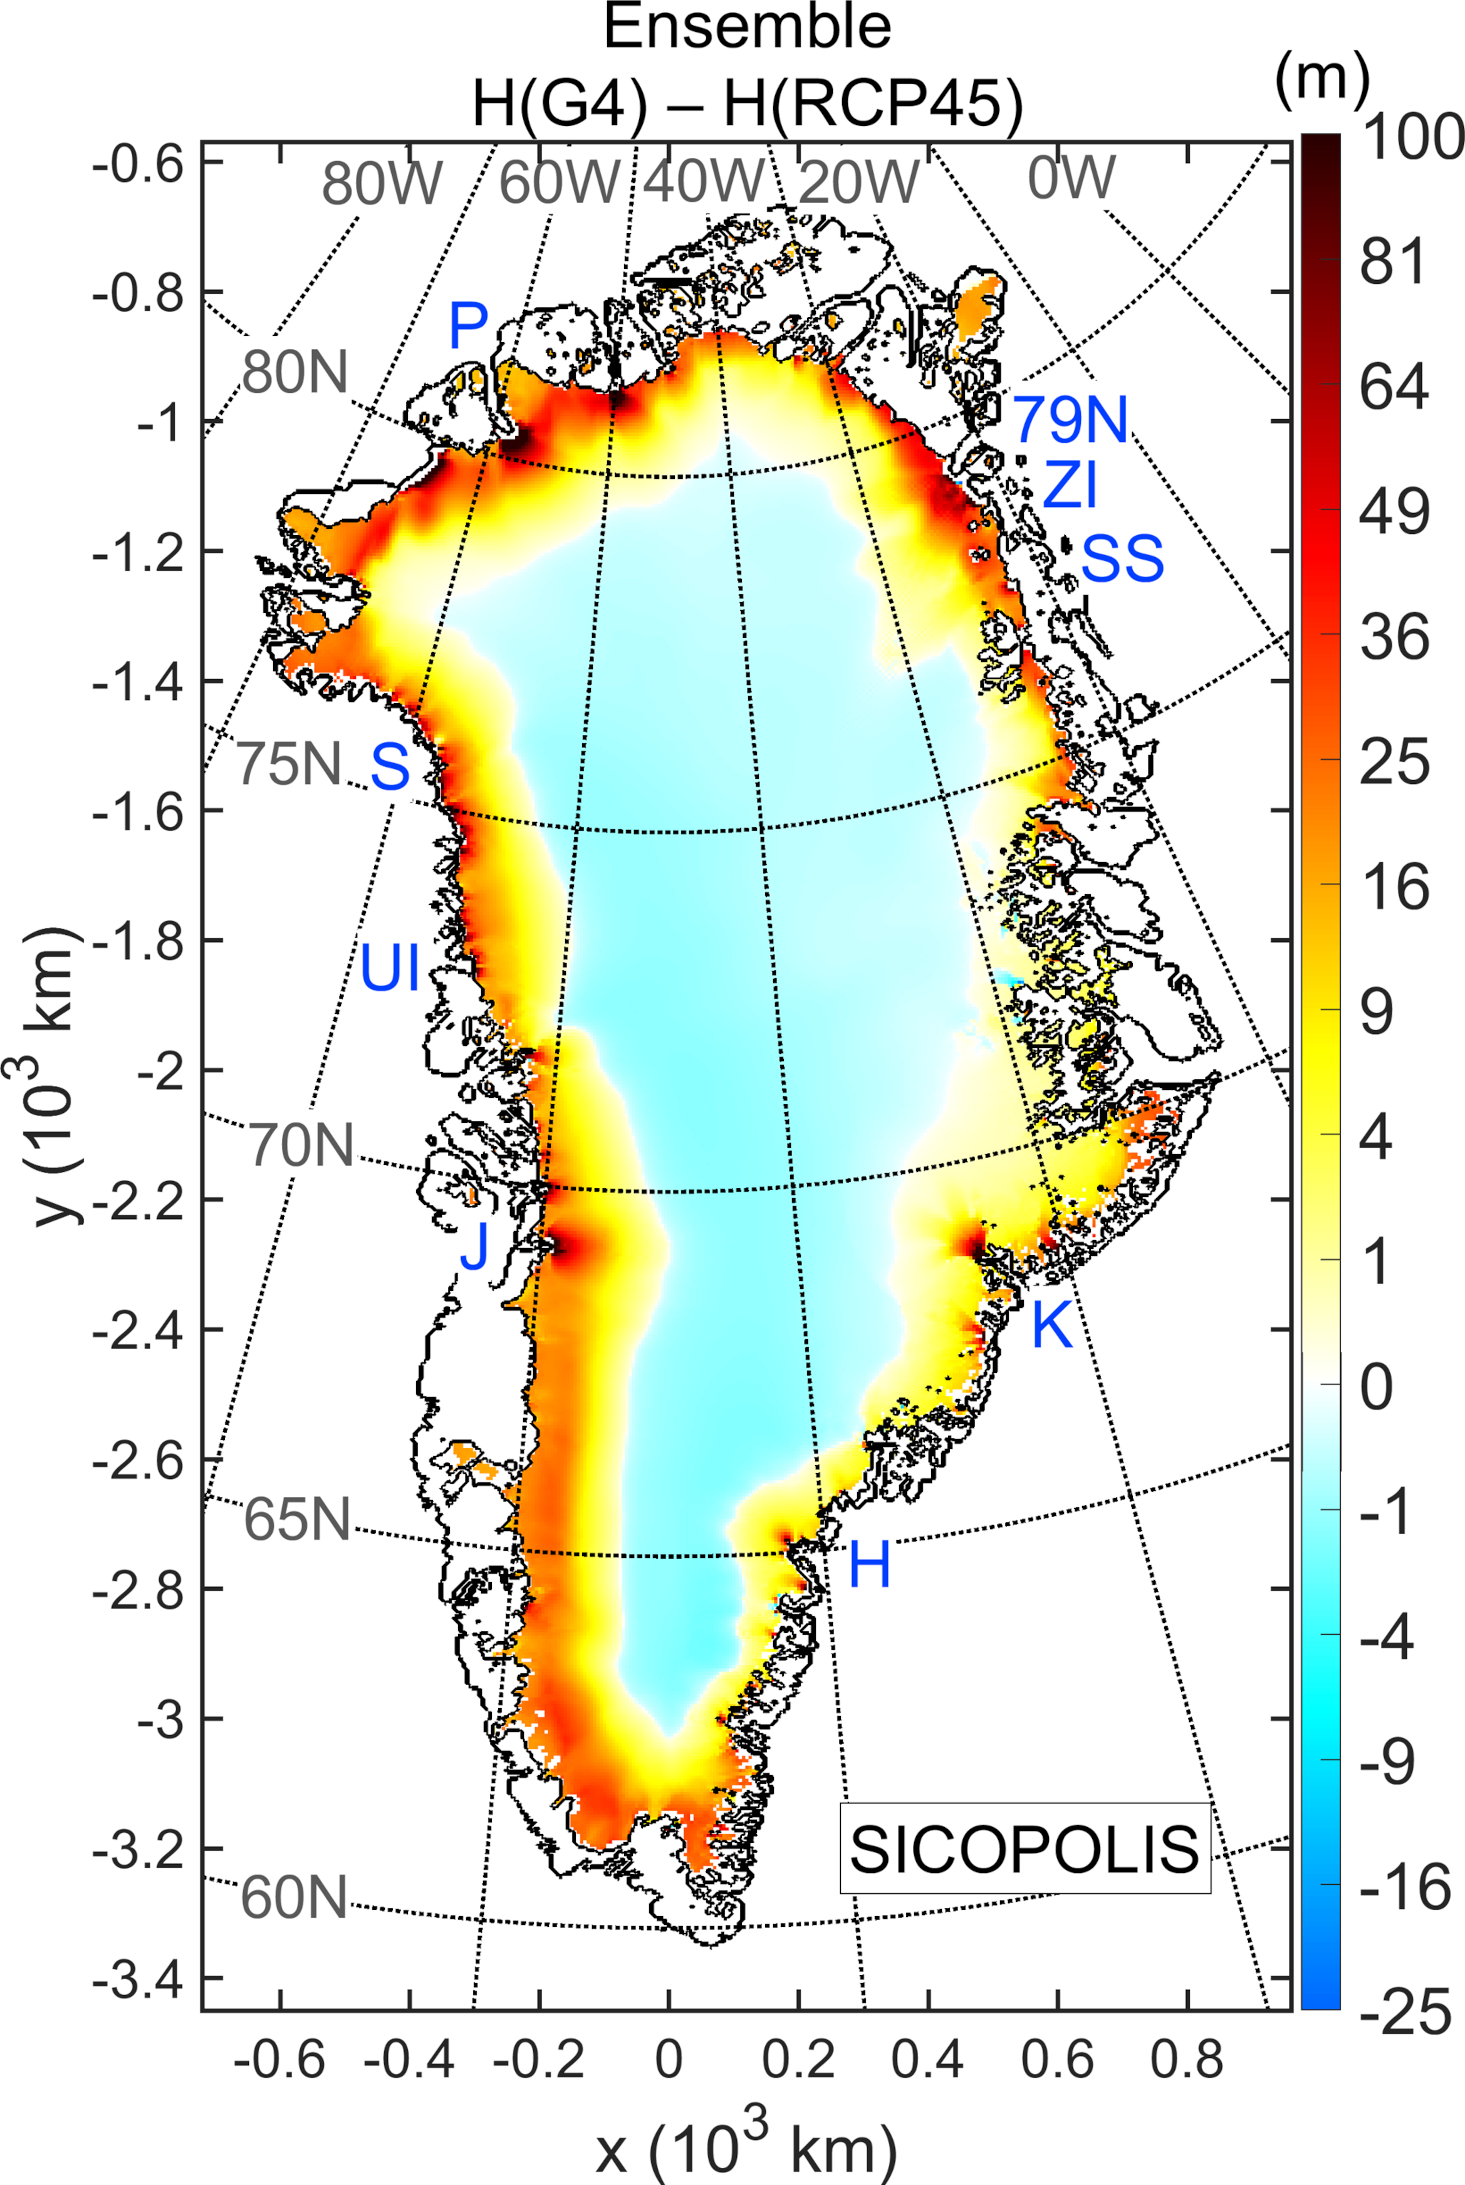 Results-of-SICOPOLIS-Simulations-Comparing-the-Change-of-the-Greenland-Ice-Sheet-Between-GeoMIP-G4-and-RCP4.5.png